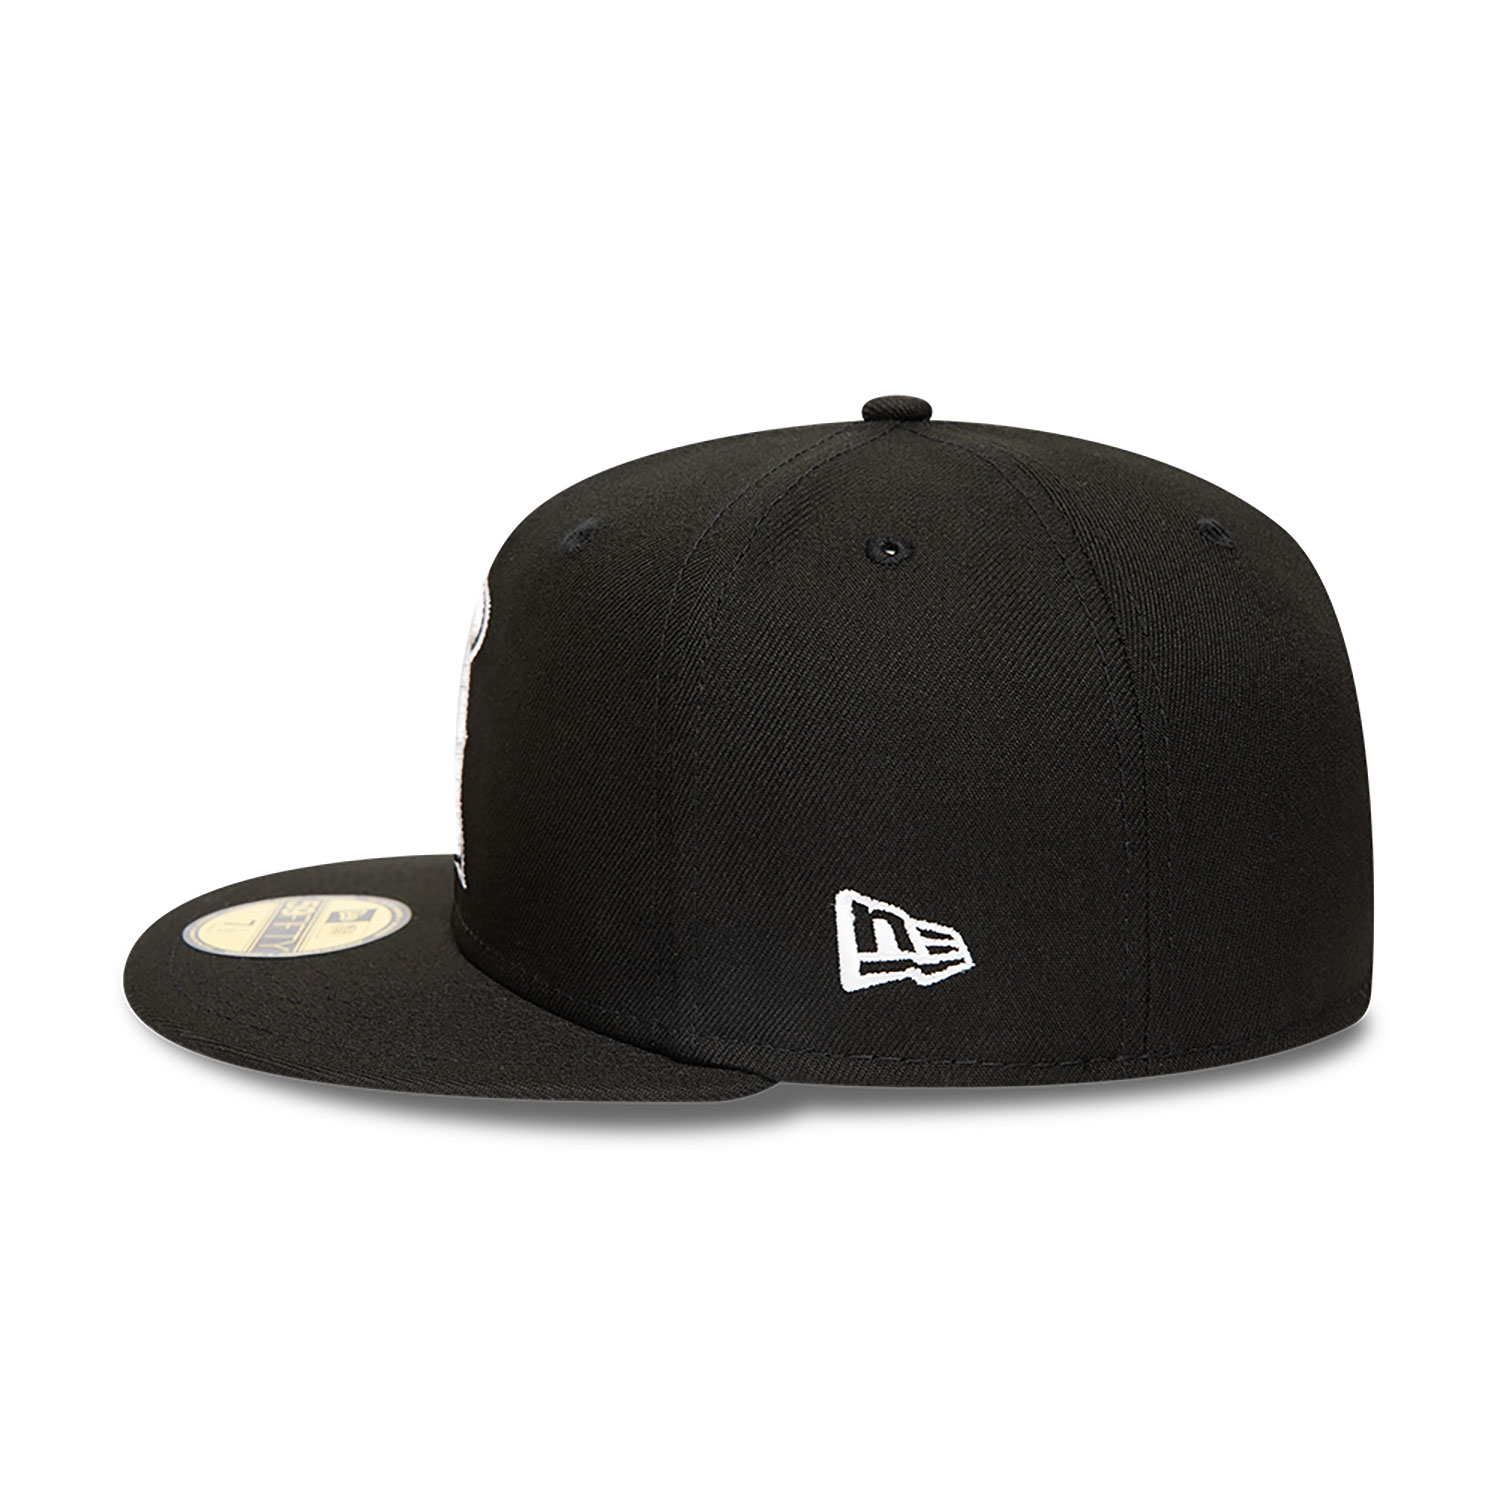 Anaheim Angels MLB Black and White 59FIFTY Fitted Cap